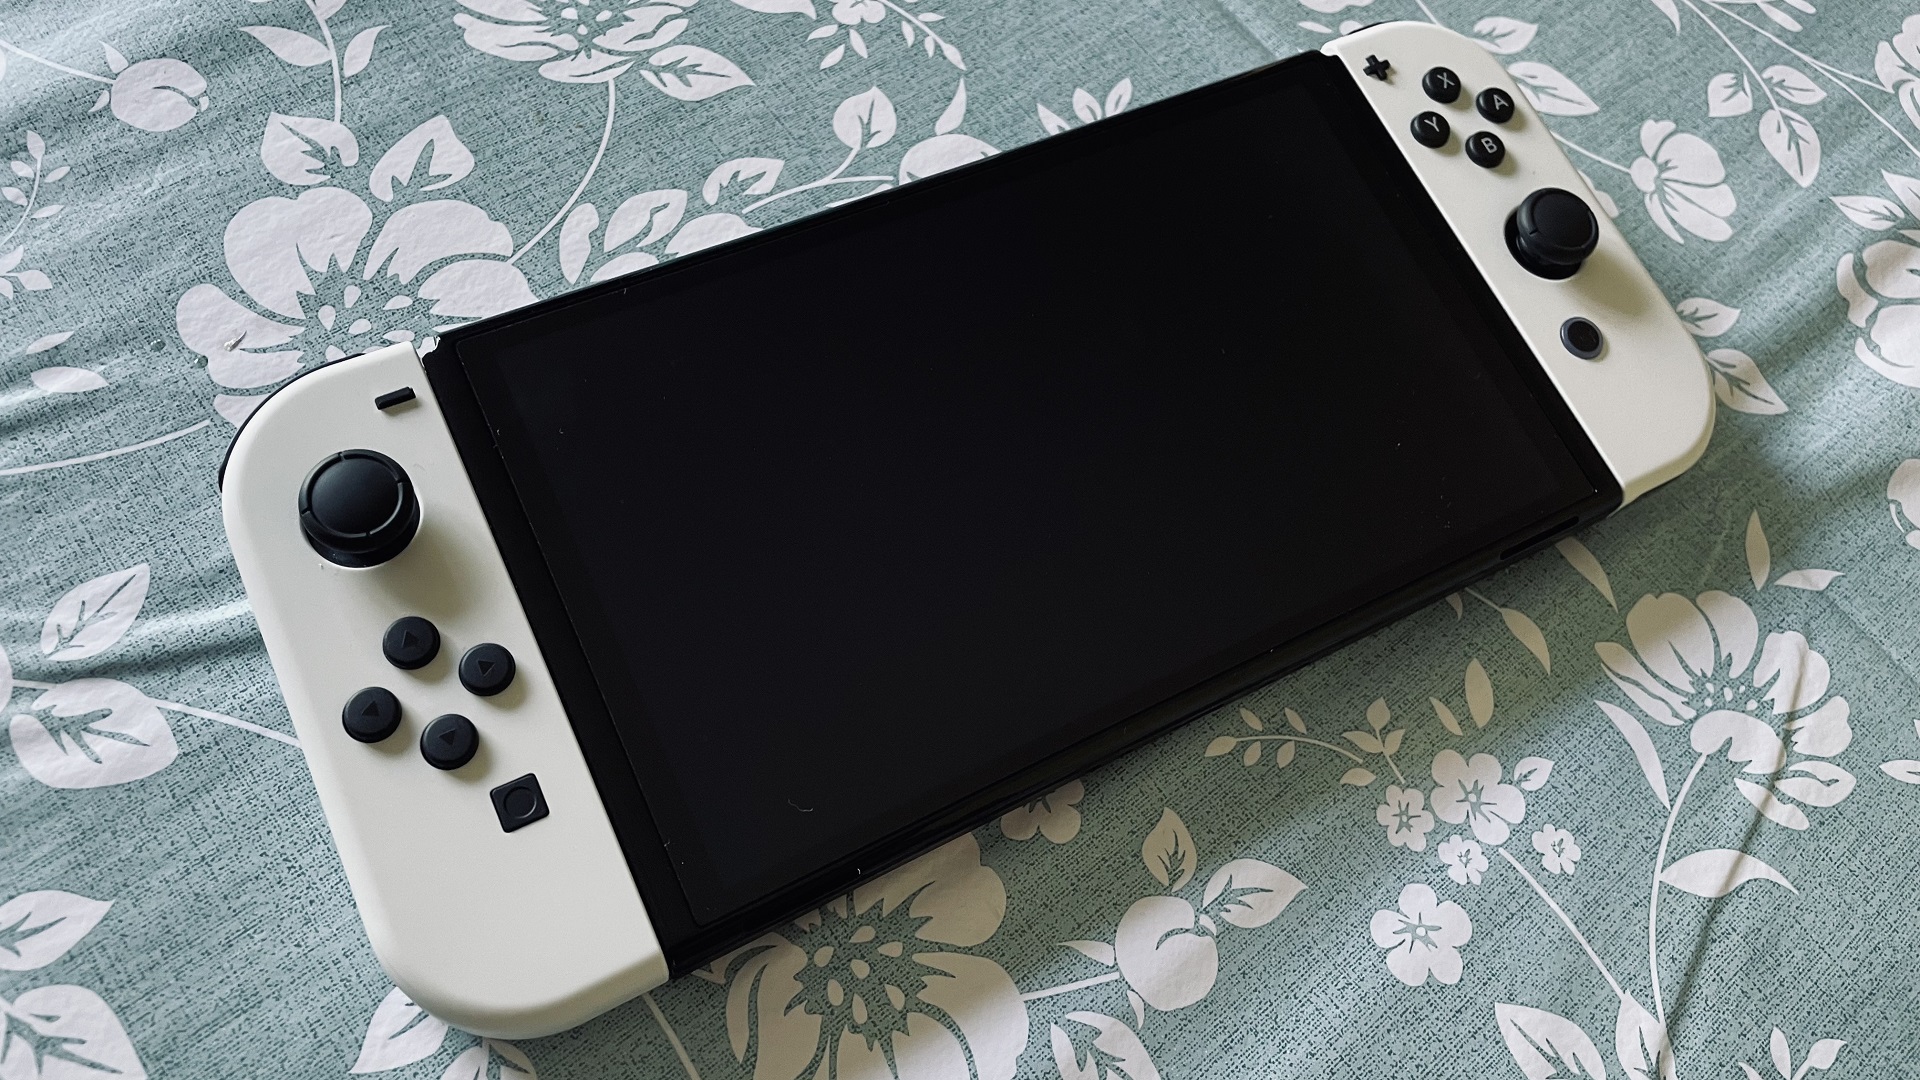 Nintendo Switch (OLED Model) review